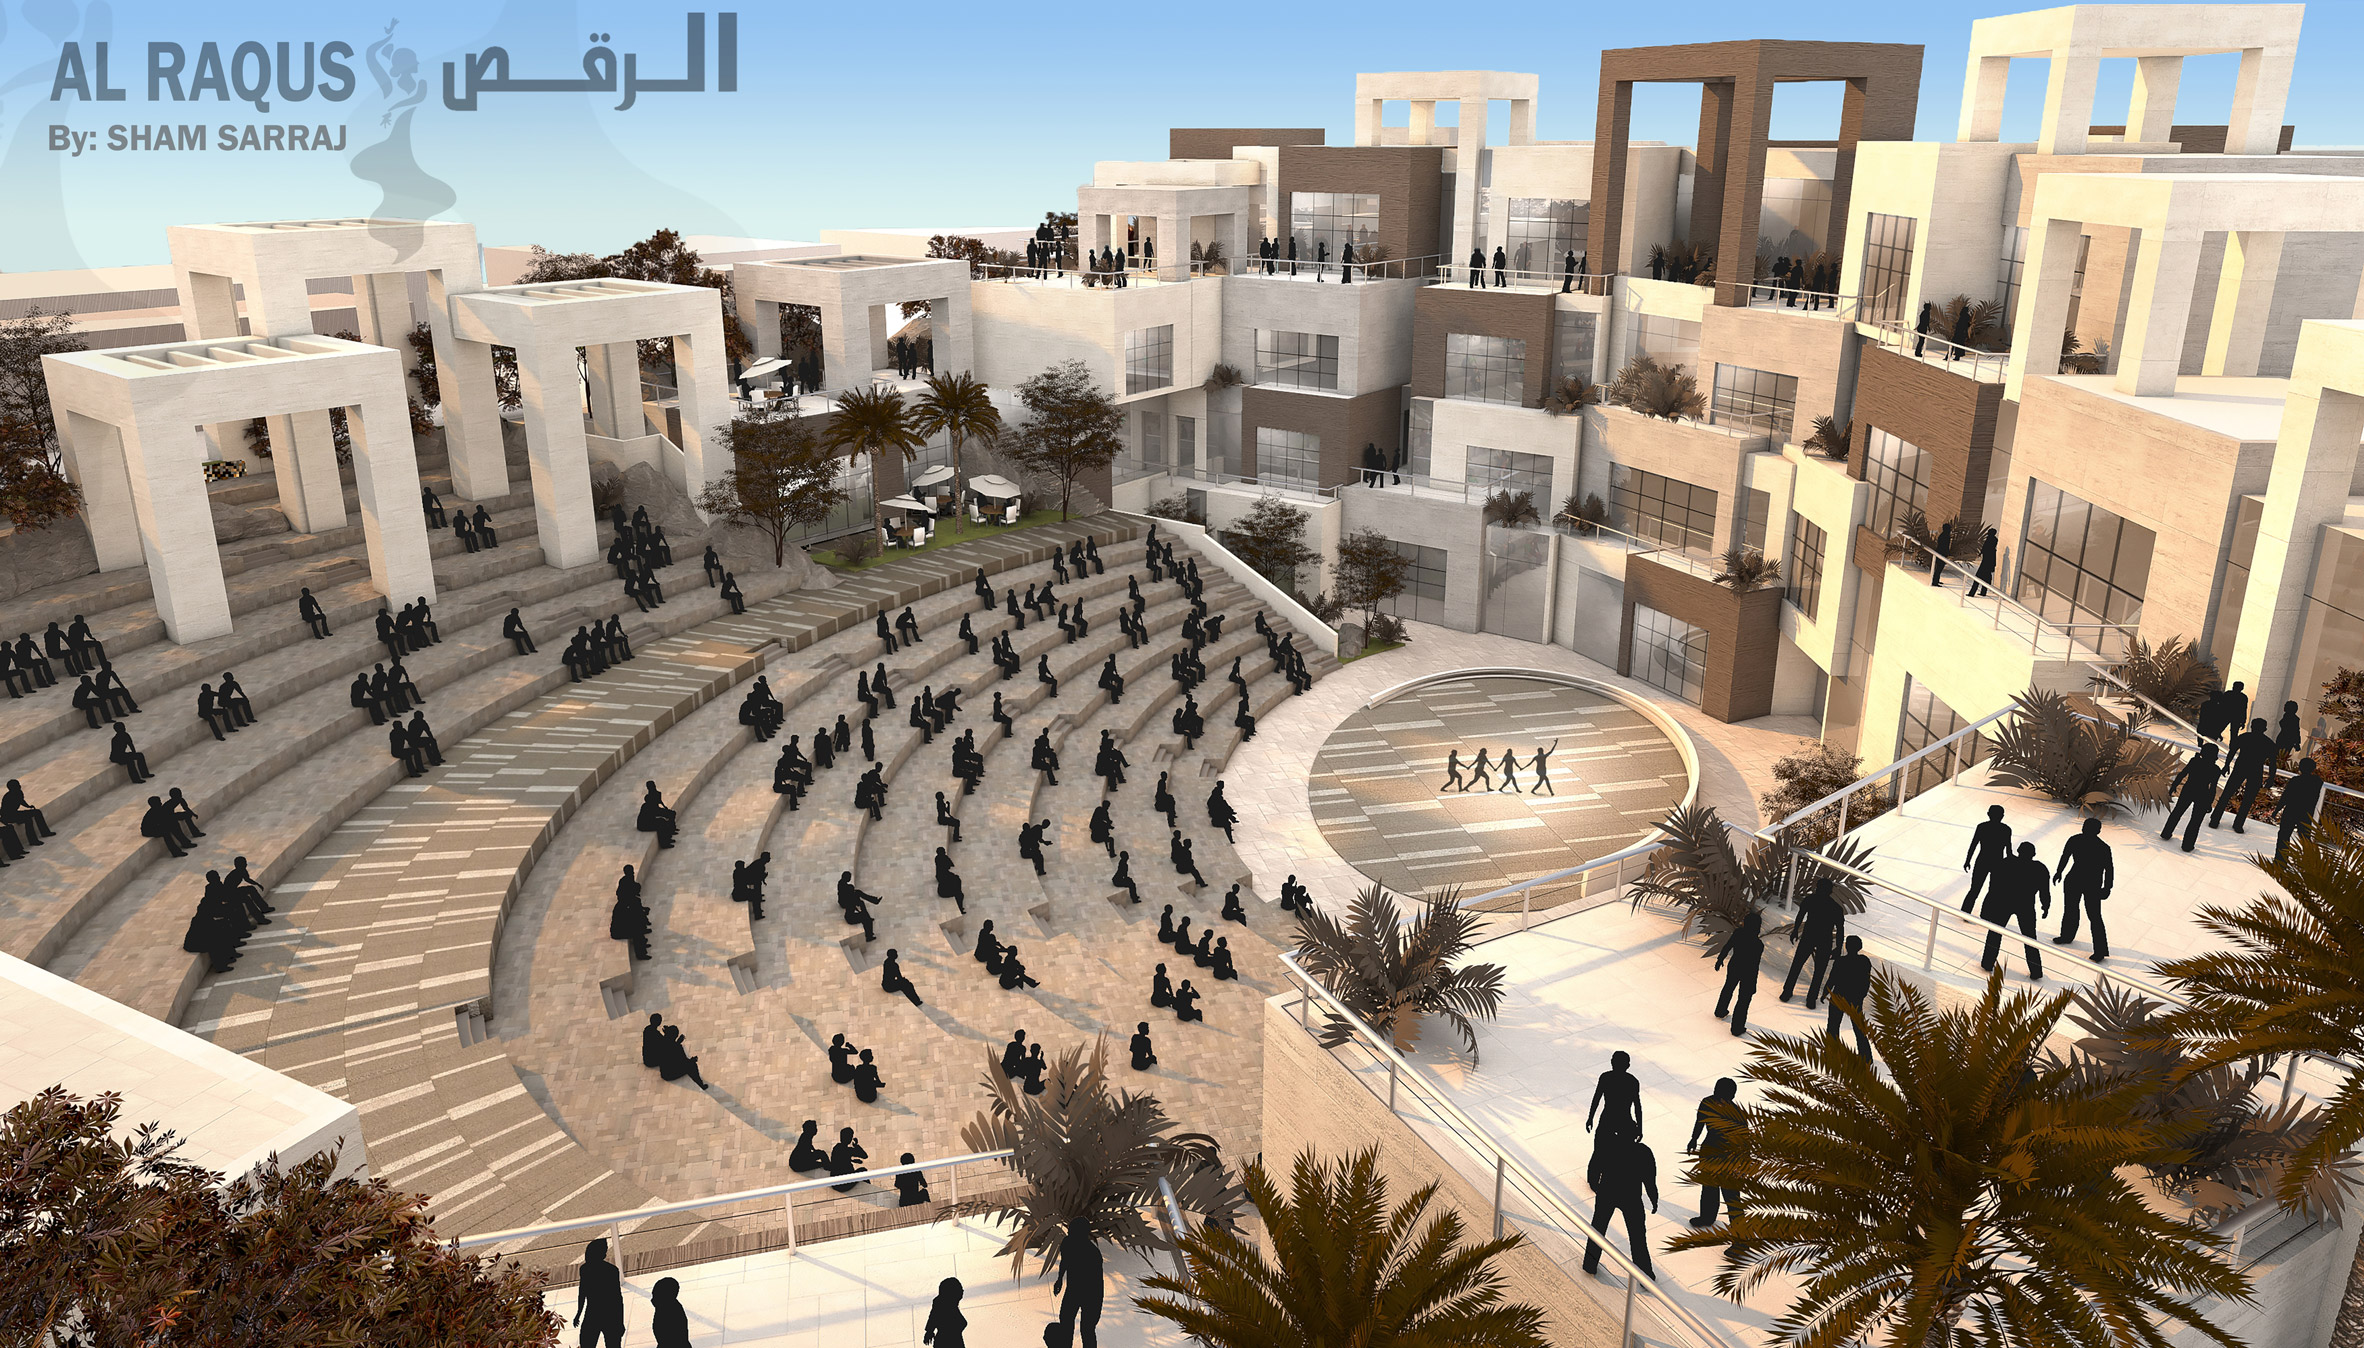 Outdoor amphitheatre design with a circular stage and square buildings